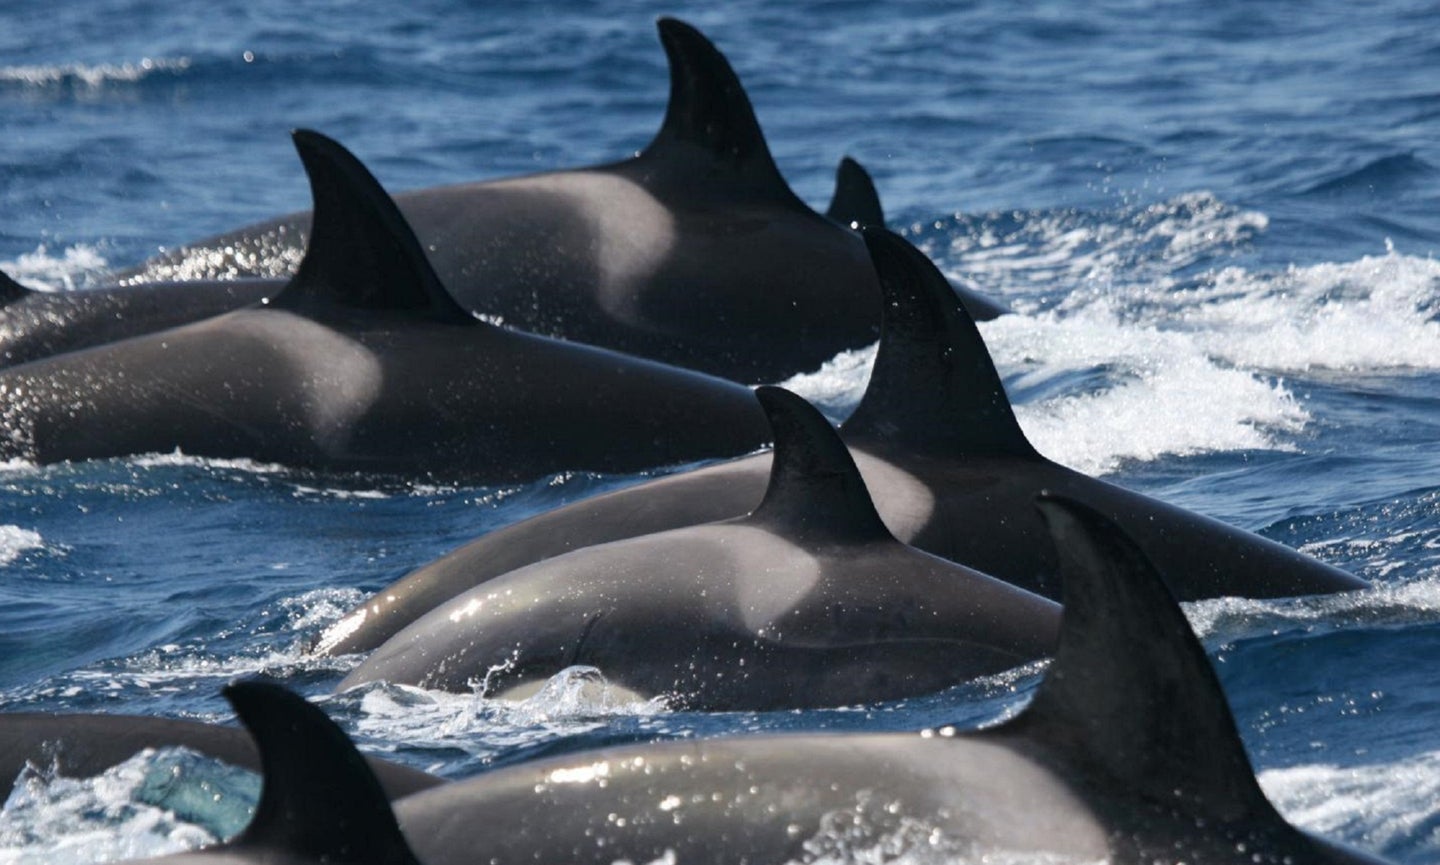 Orca whale pod off Iberian coast from the subpopulation of orcas attacking sailboats in Europe